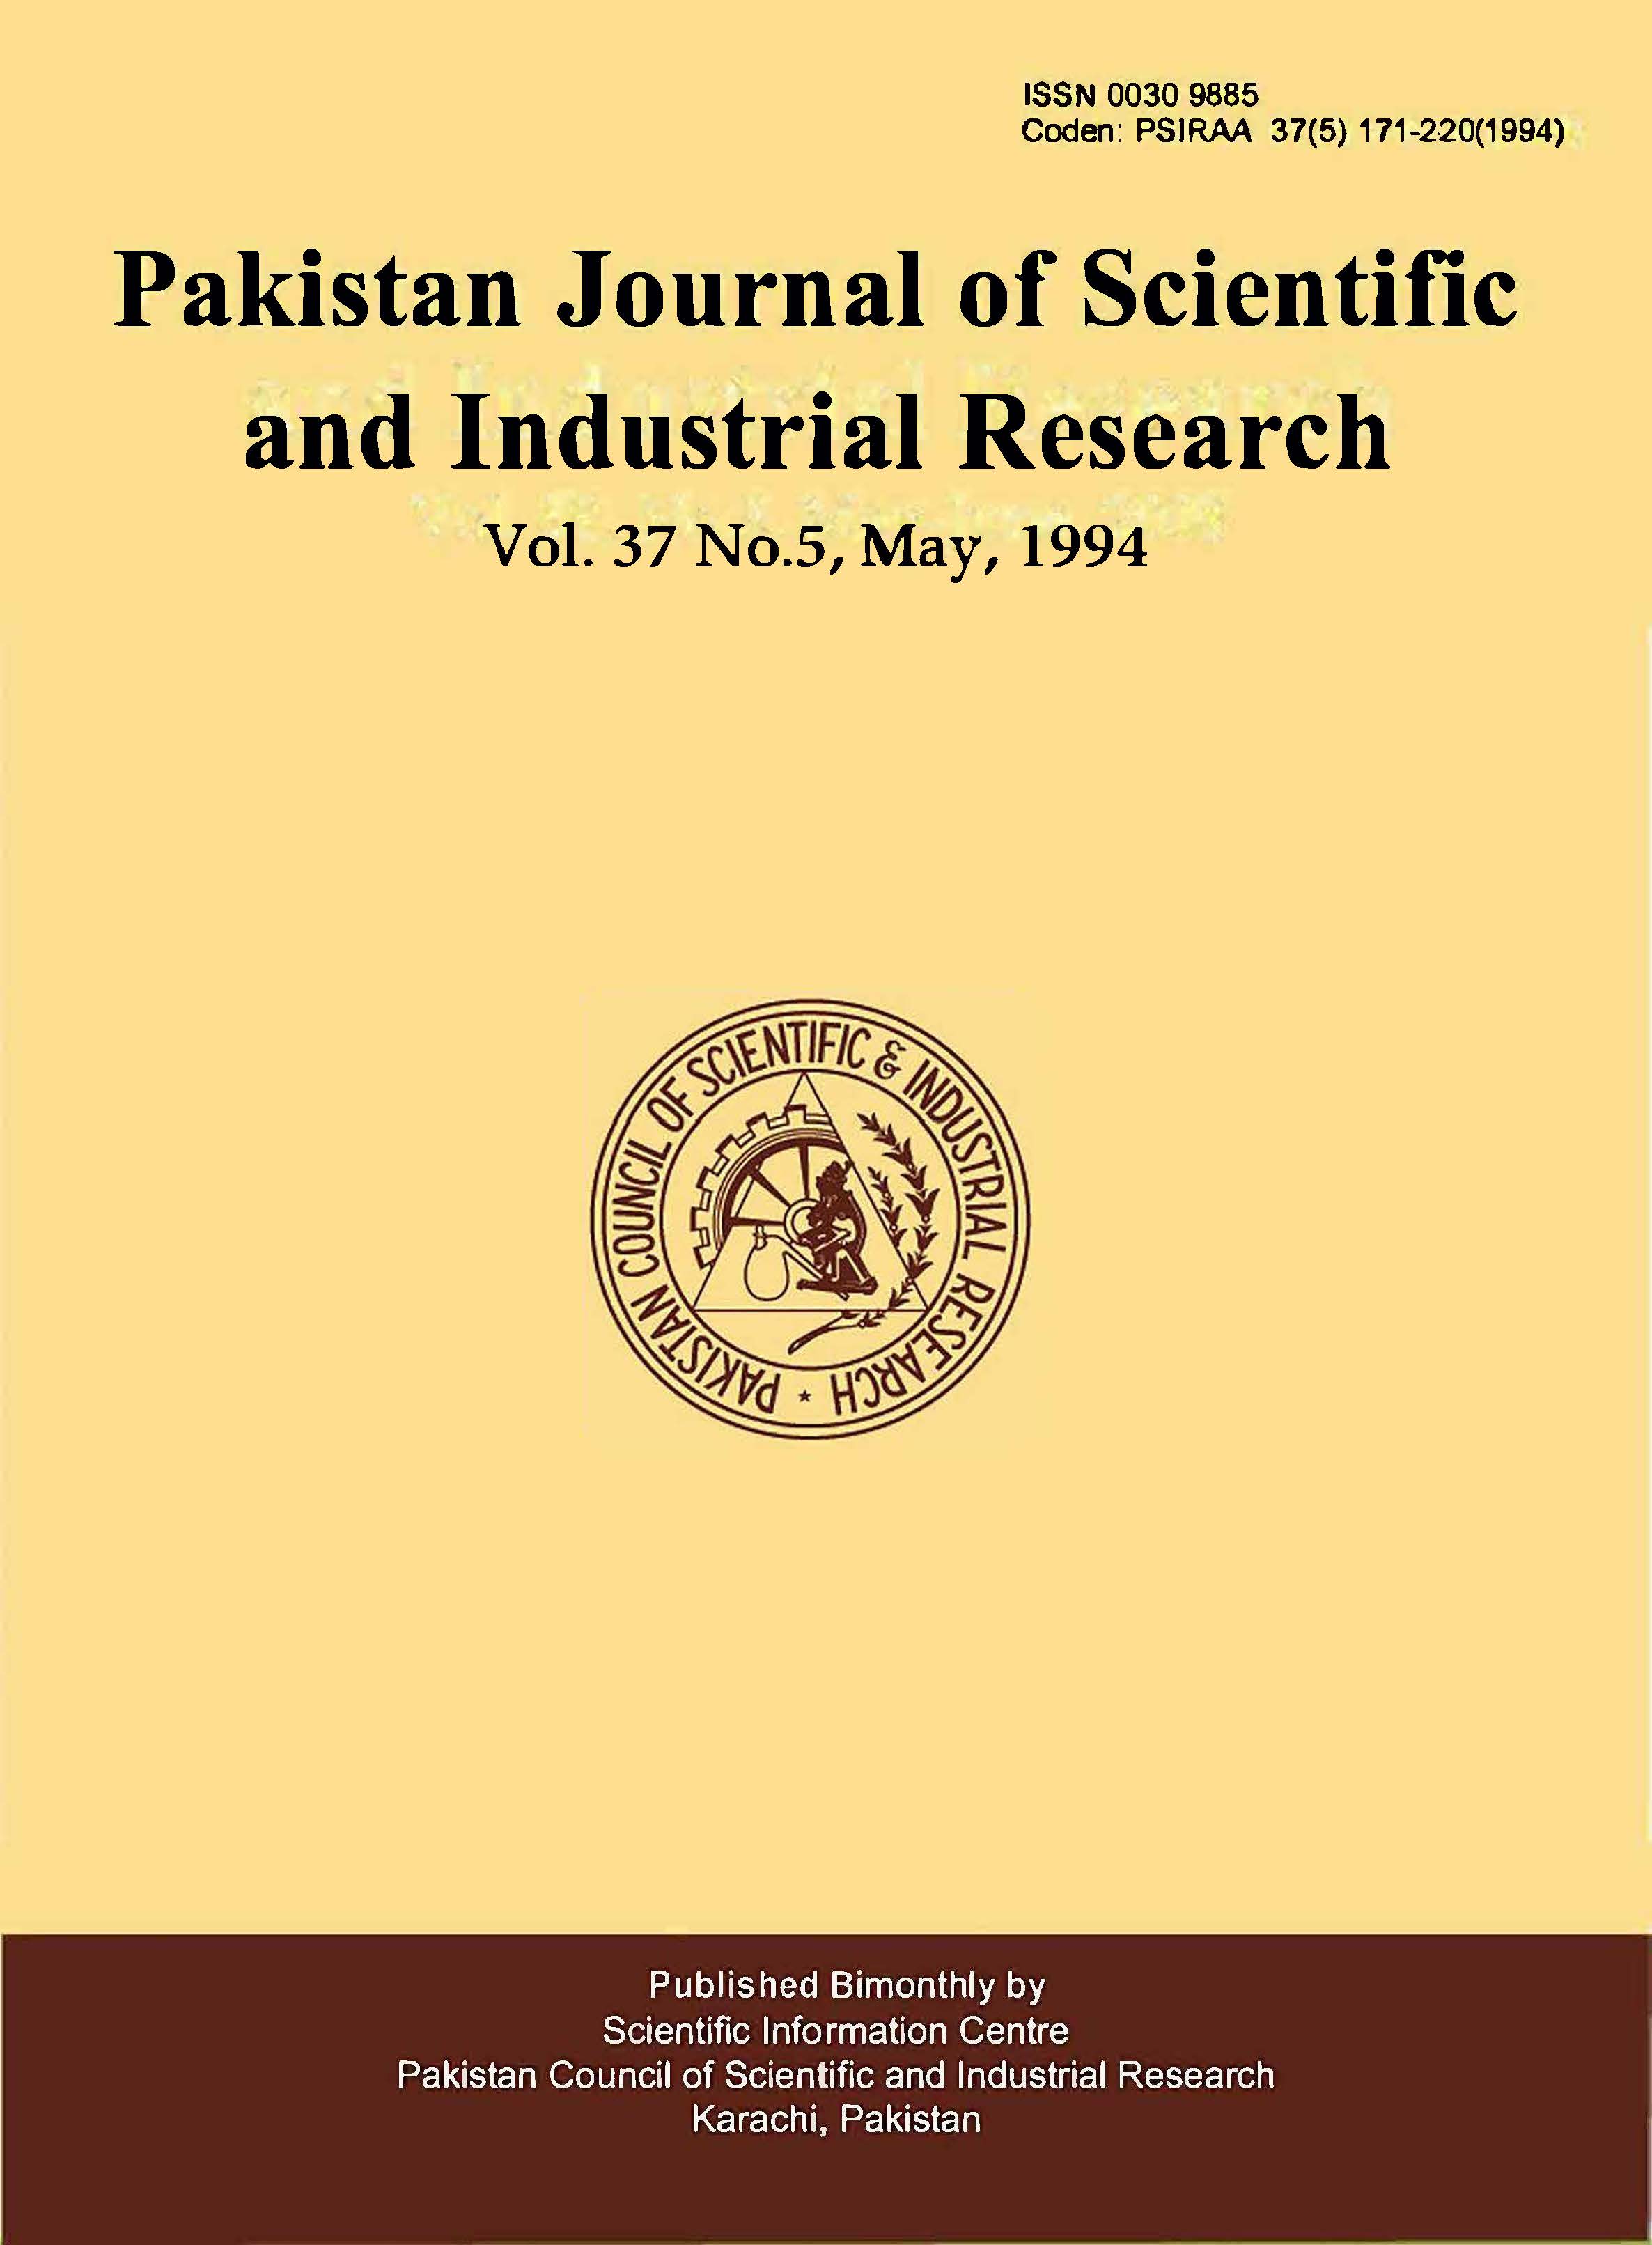 					View Vol. 37 No. 5 (1994): Pakistan Journal of Scientific and Industrial Research
				